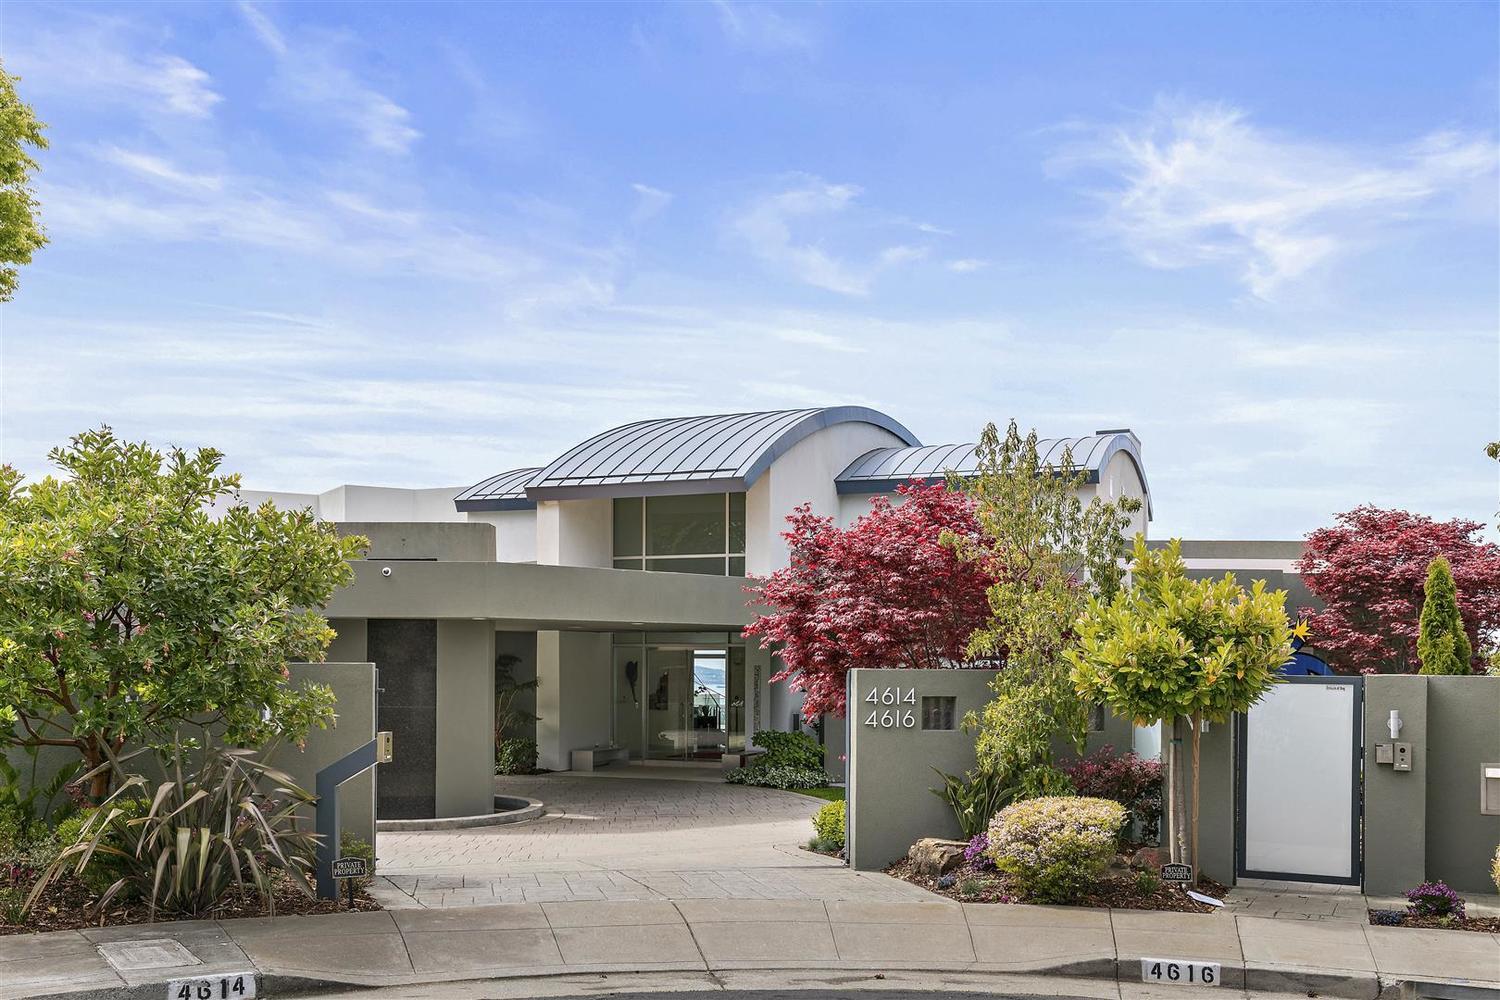 https://www.anthonyglim.com/all-homes-listed-in-oakland/f0fe8f14-6c66-48fc-8c42-c368951c5a94/